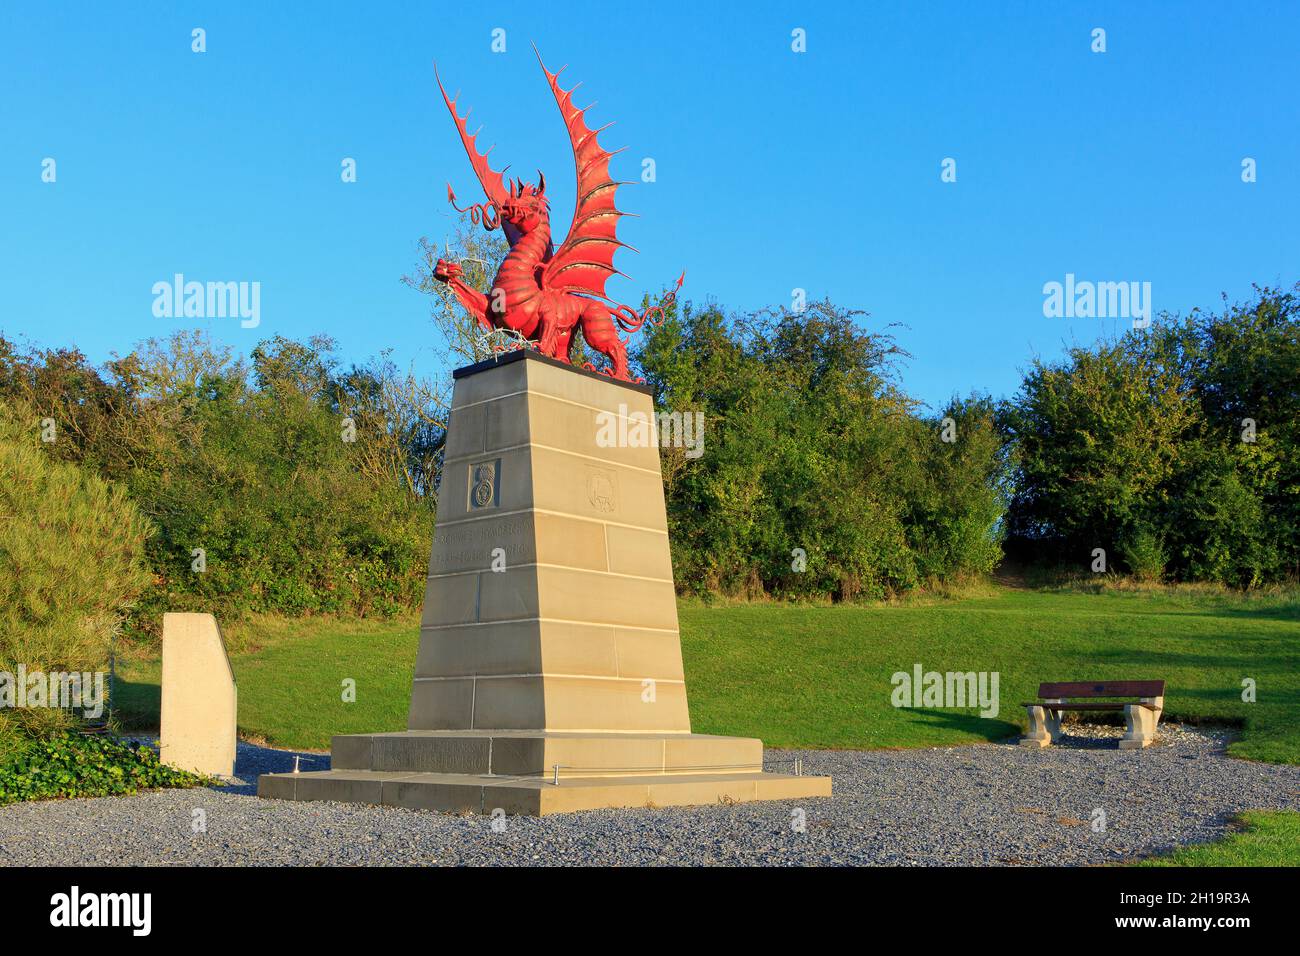 The 38th Welsh Division Memorial in Carnoy-Mametz (Somme), France commemorating the men that died during the Battle for Mametz Forest Stock Photo